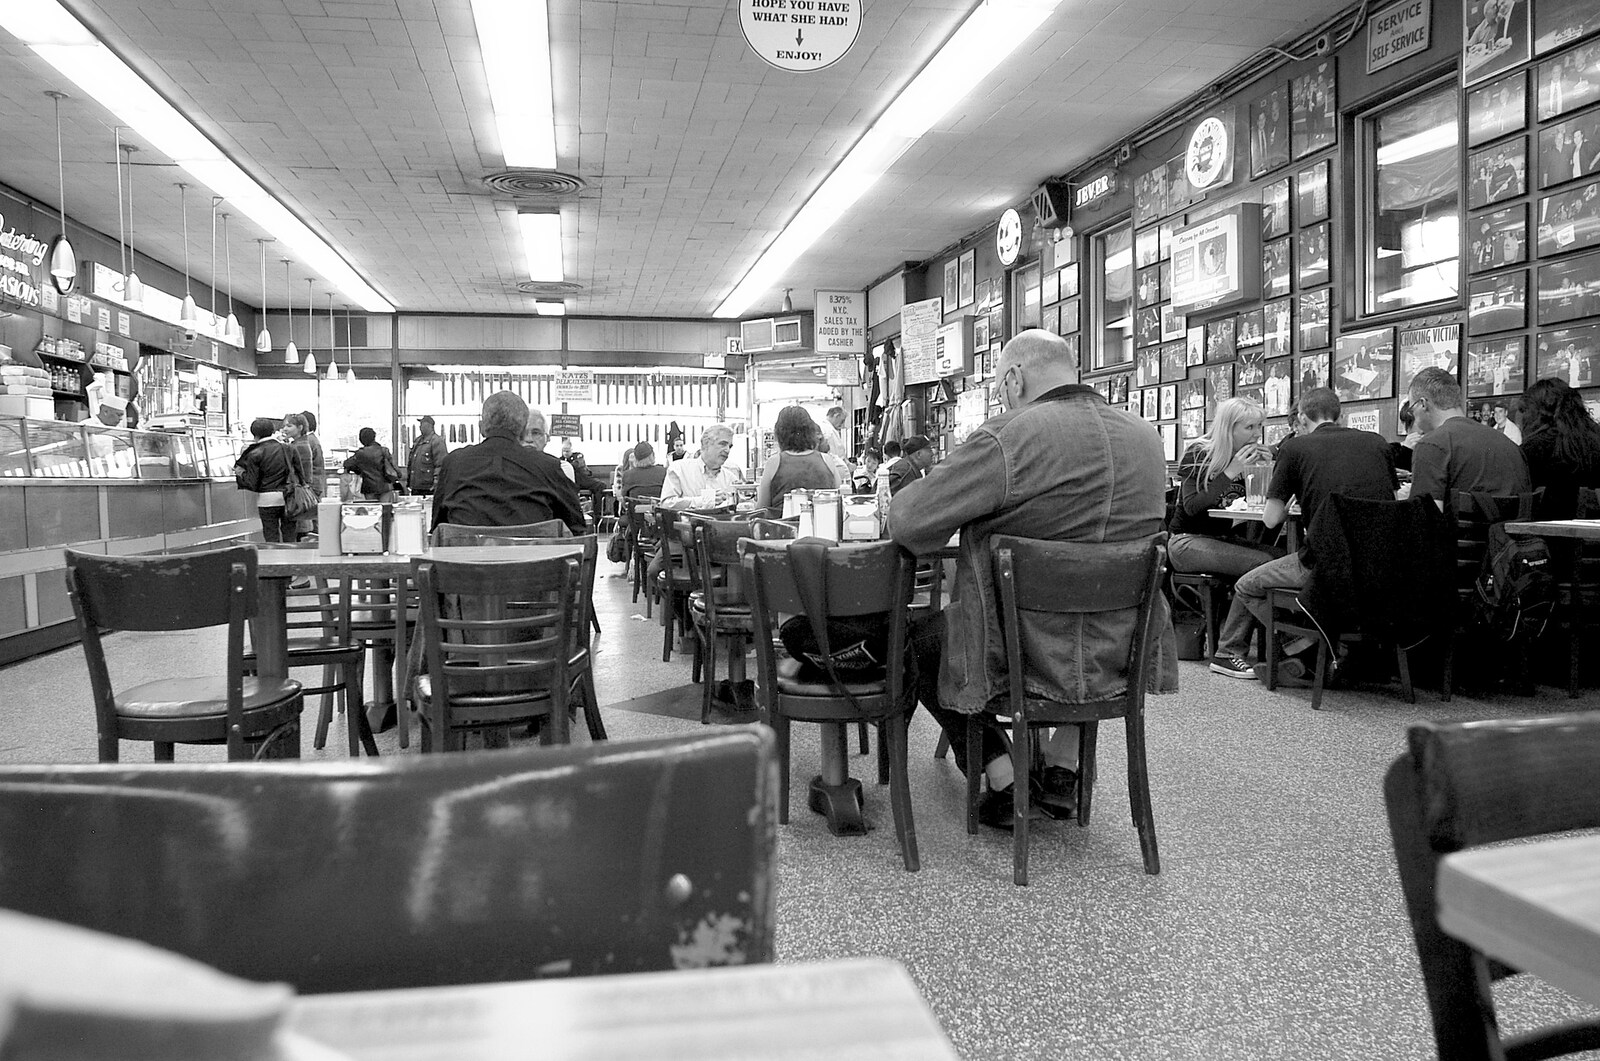 Inside Katz's deli from A Union Square Demo, Bryant Park and Columbus Circle, New York, US - 2nd May 2006